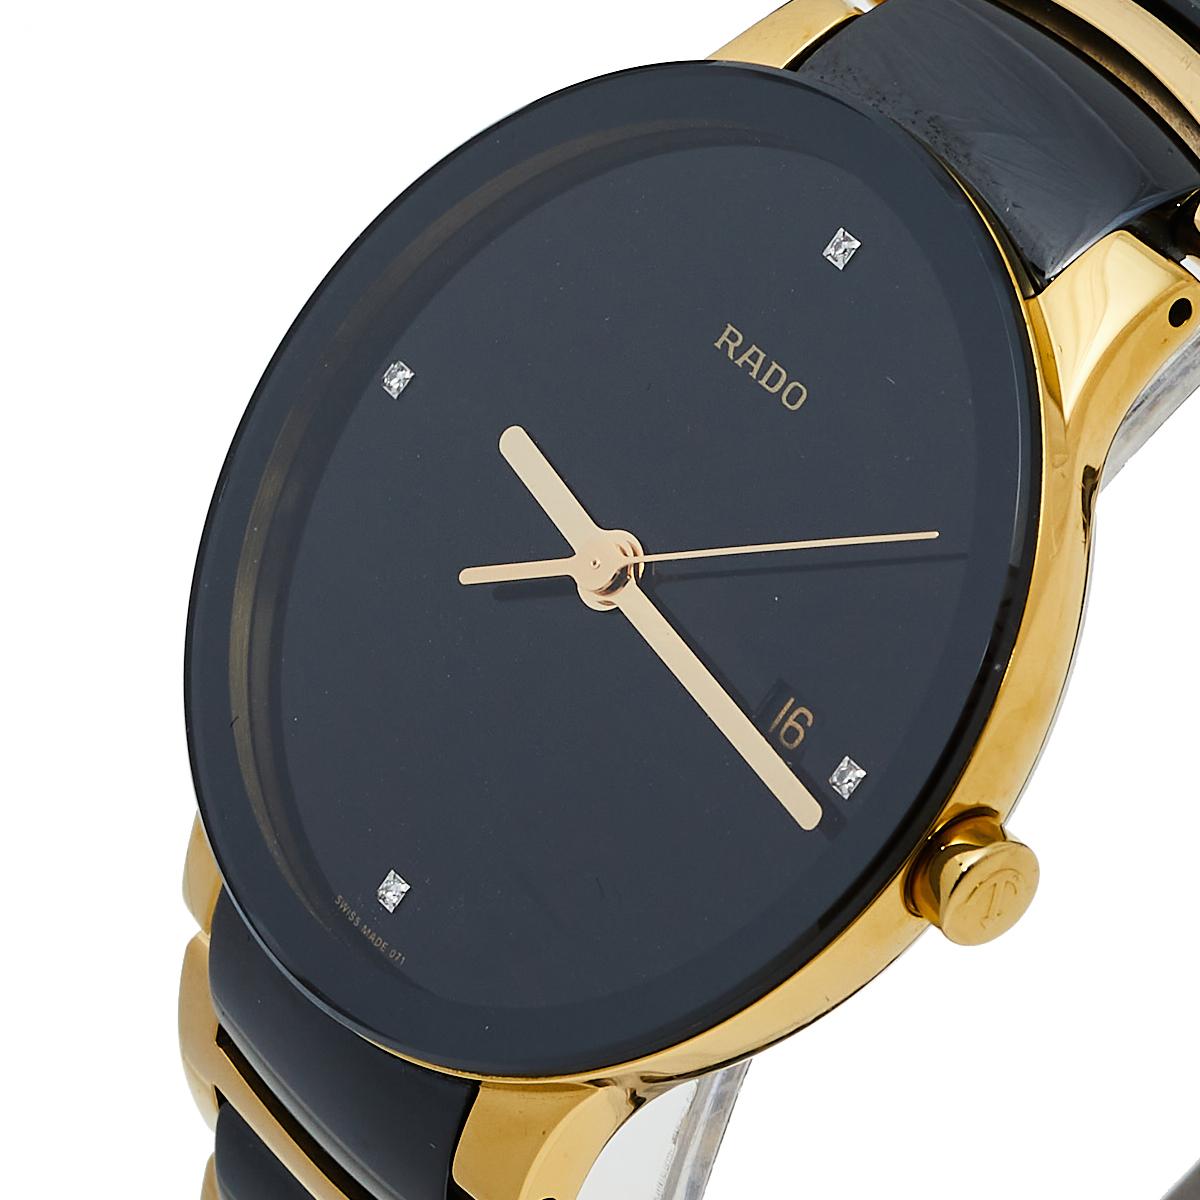 This wristwatch from Rado is elegance represented in a subtle fashion. Created from PVD-plated stainless steel, this watch flaunts a round case. It follows a quartz movement and has a black dial with stud hour markers, three hands, a date window,